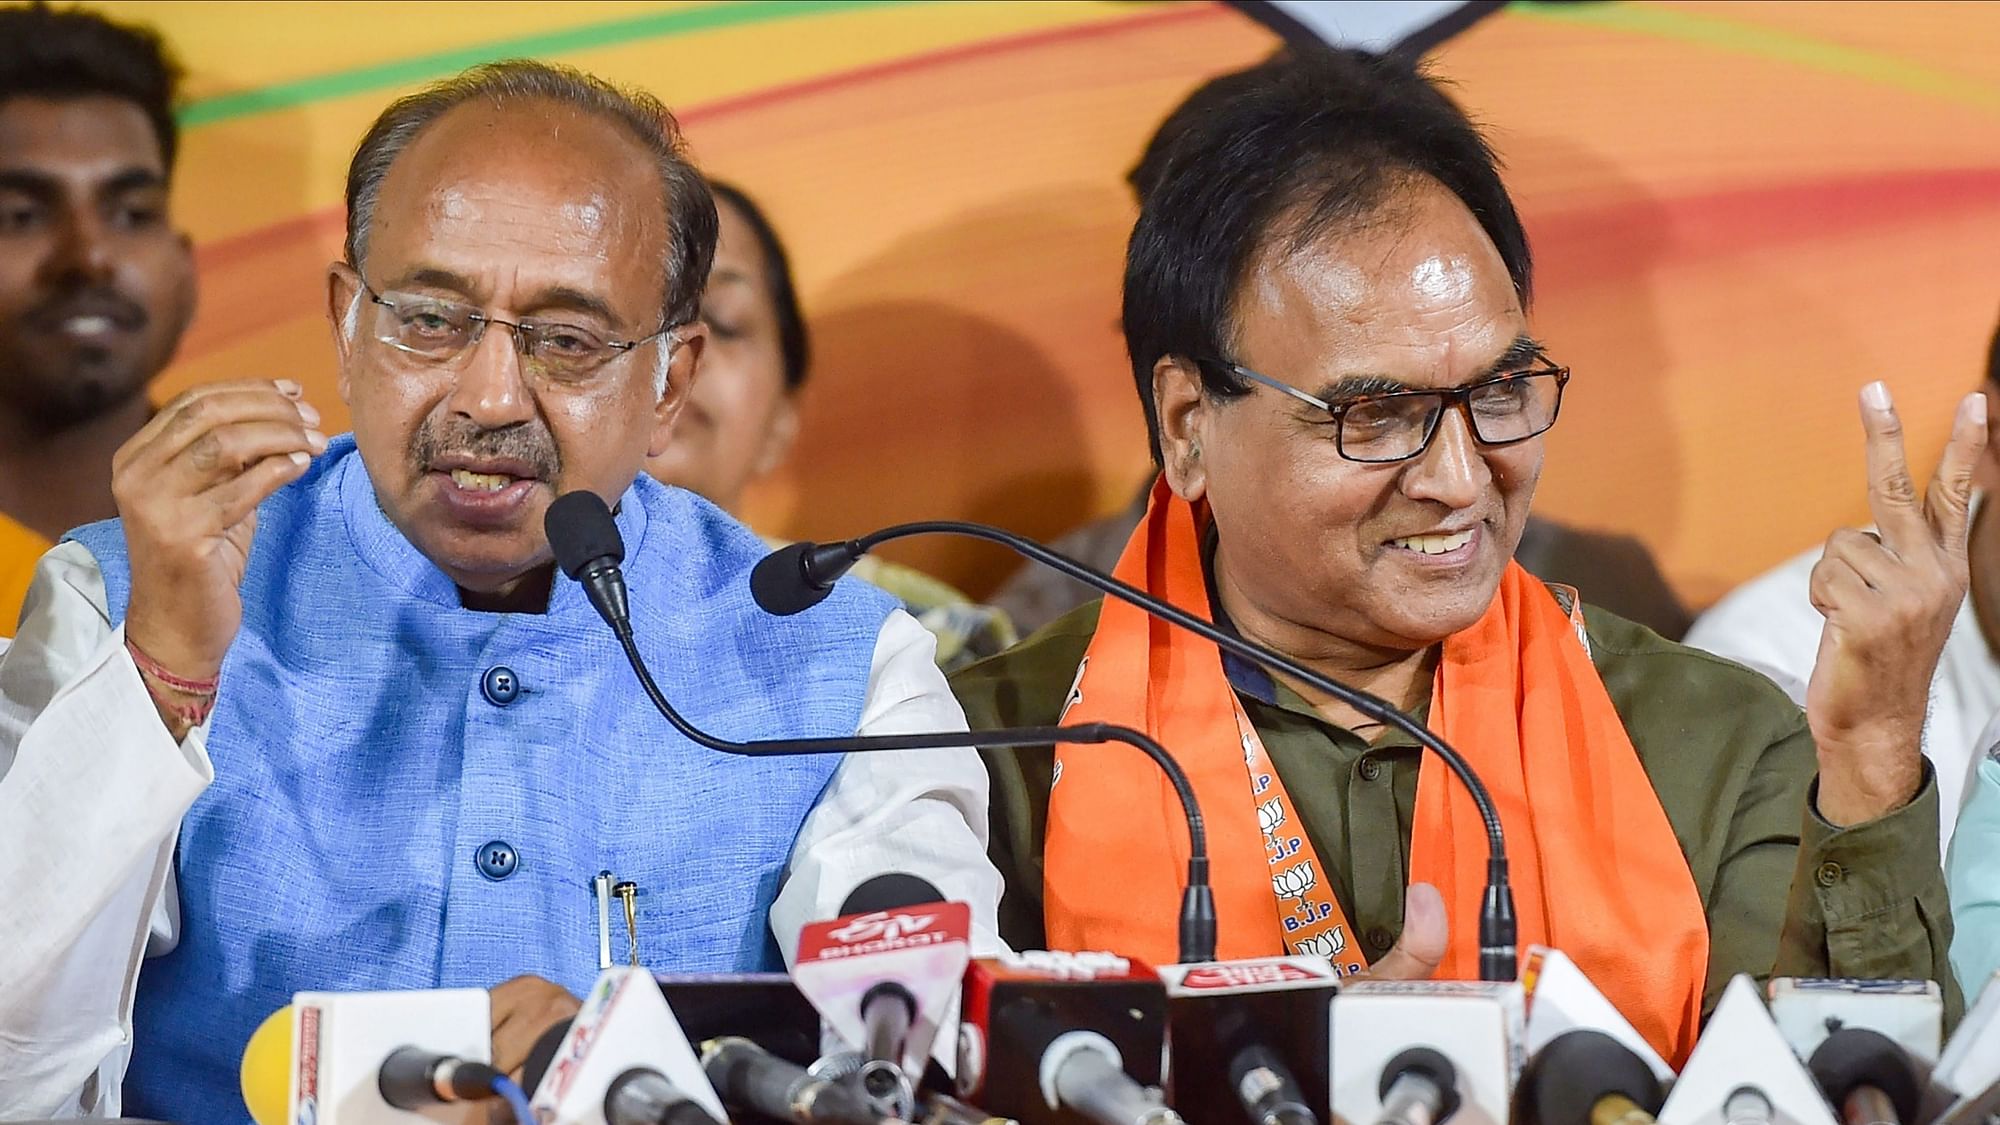 BJP’s Vijay Goel (L) and Aam Aadmi Party MLA from Gandhi Nagar Anil Bajpai (R) after the latter joined the BJP.